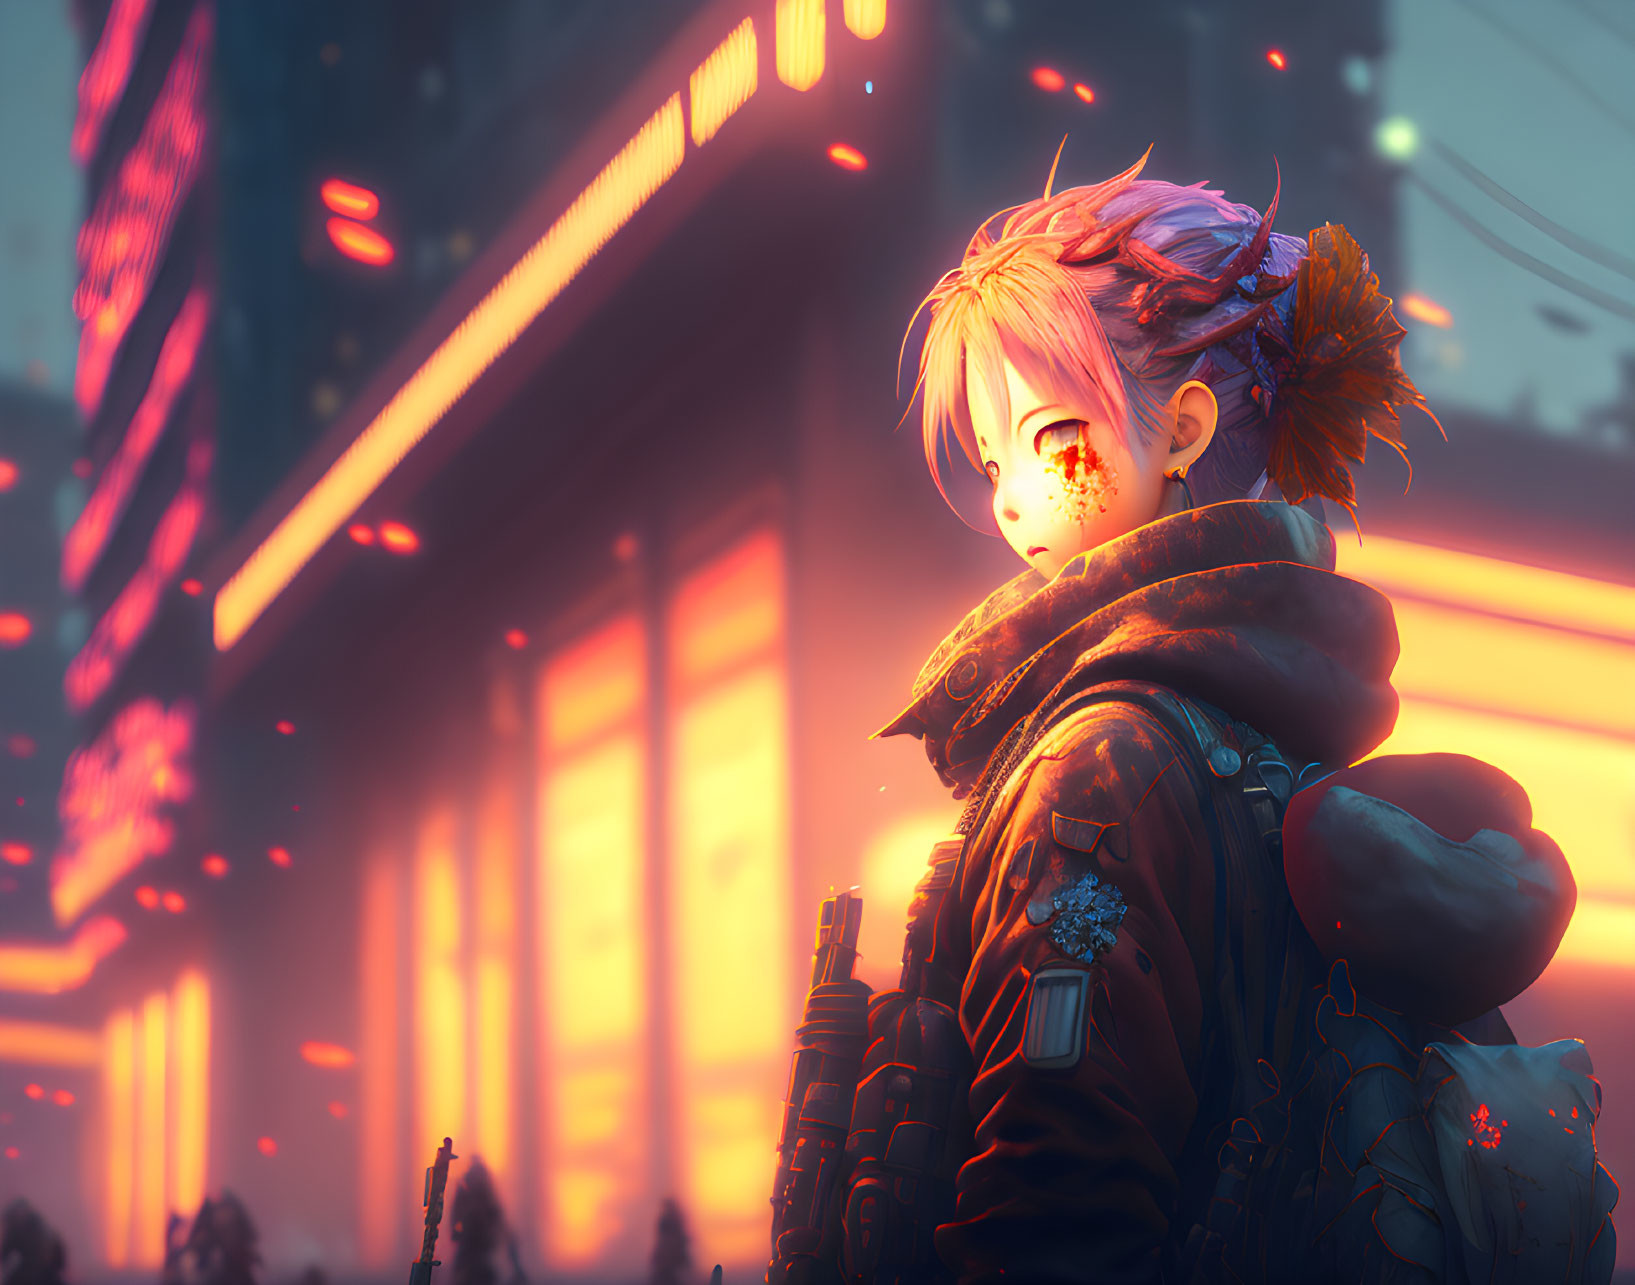 Young person with short hair in neon-lit futuristic cityscape at dusk